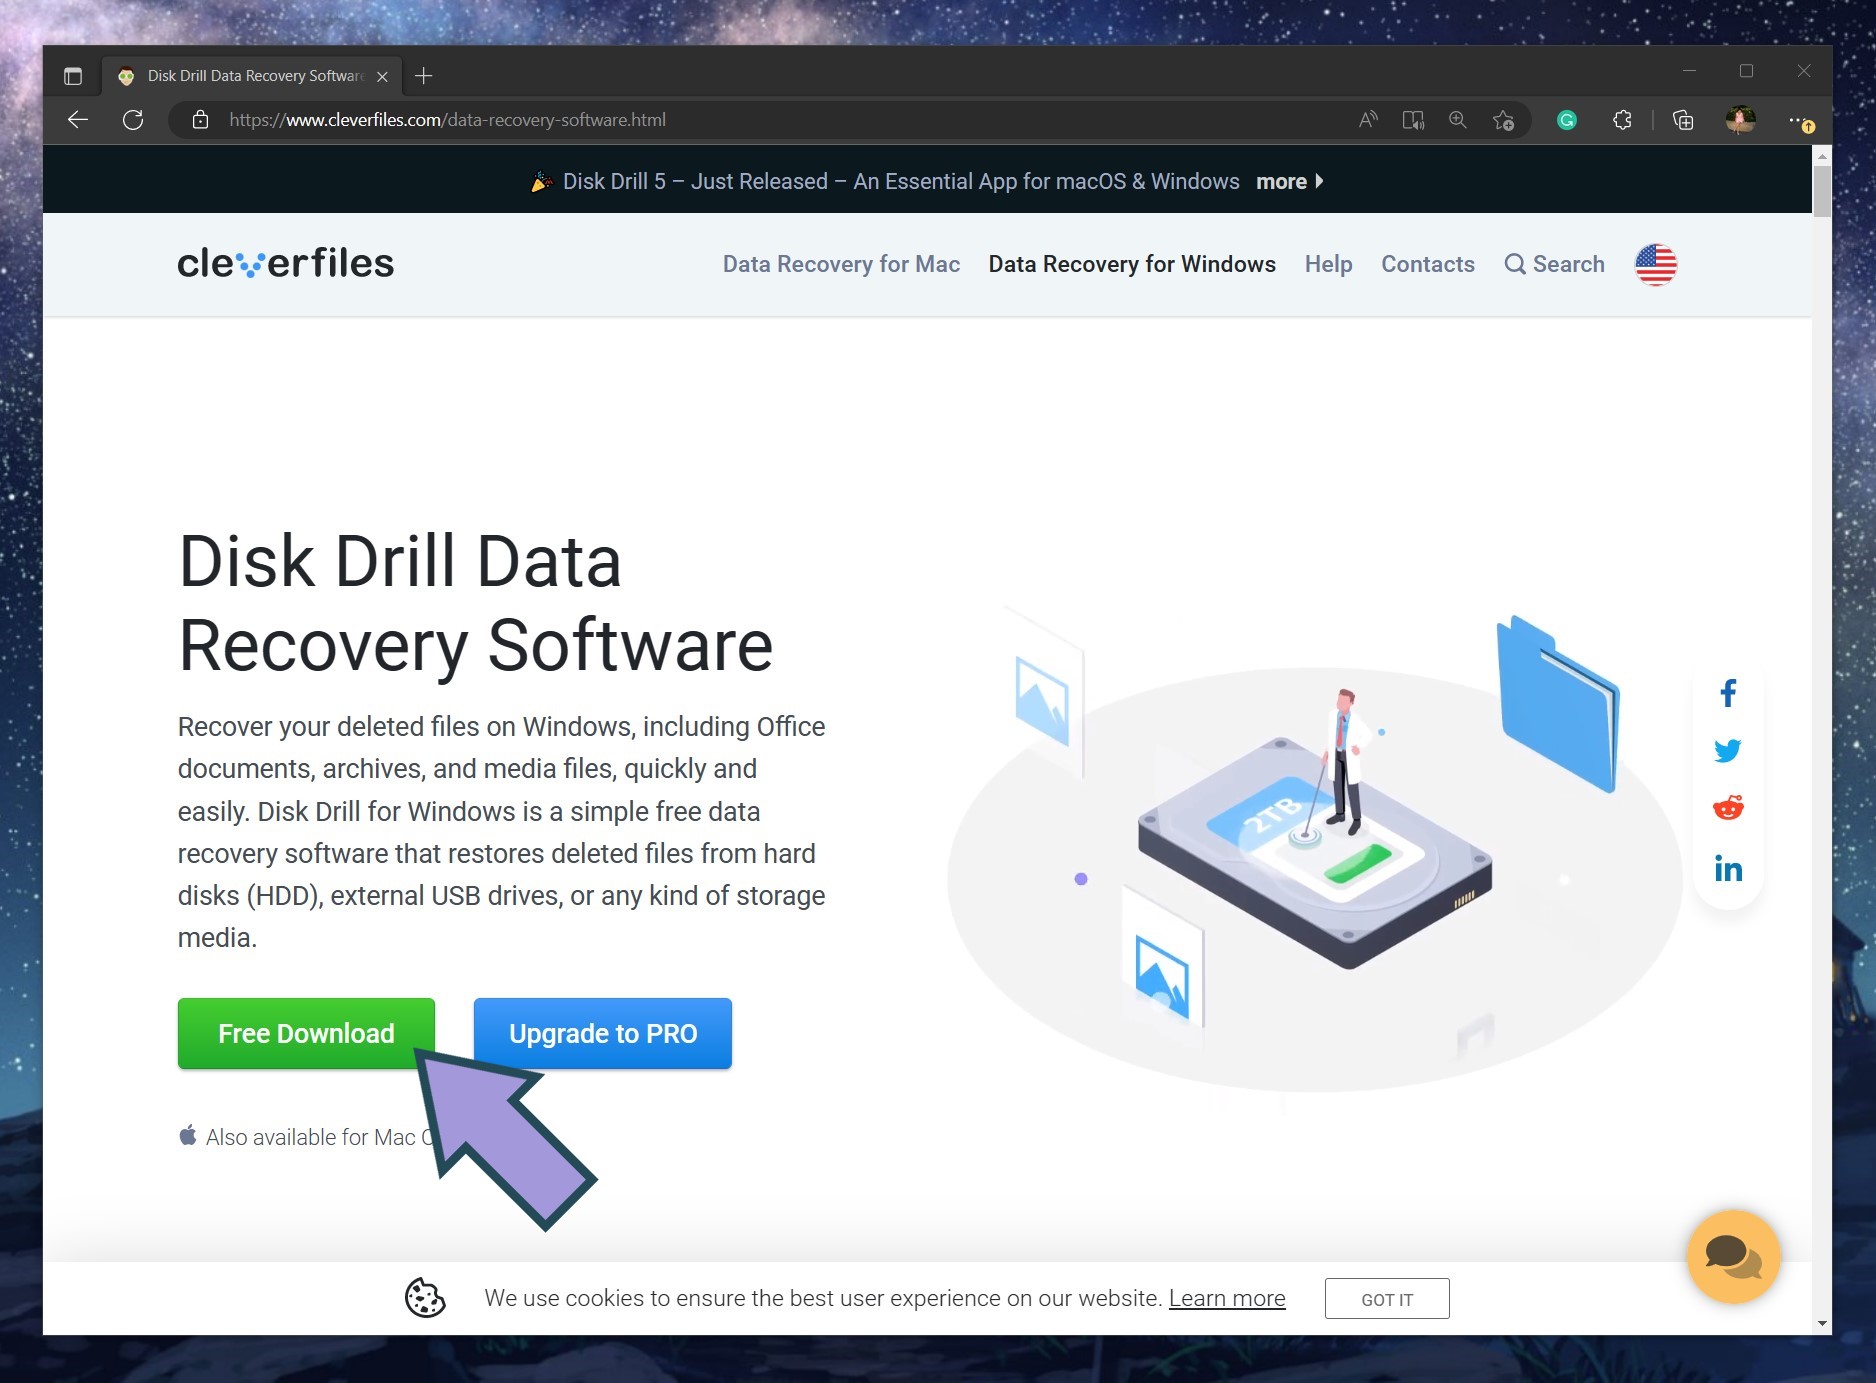 Disk Drill data recovery software download page